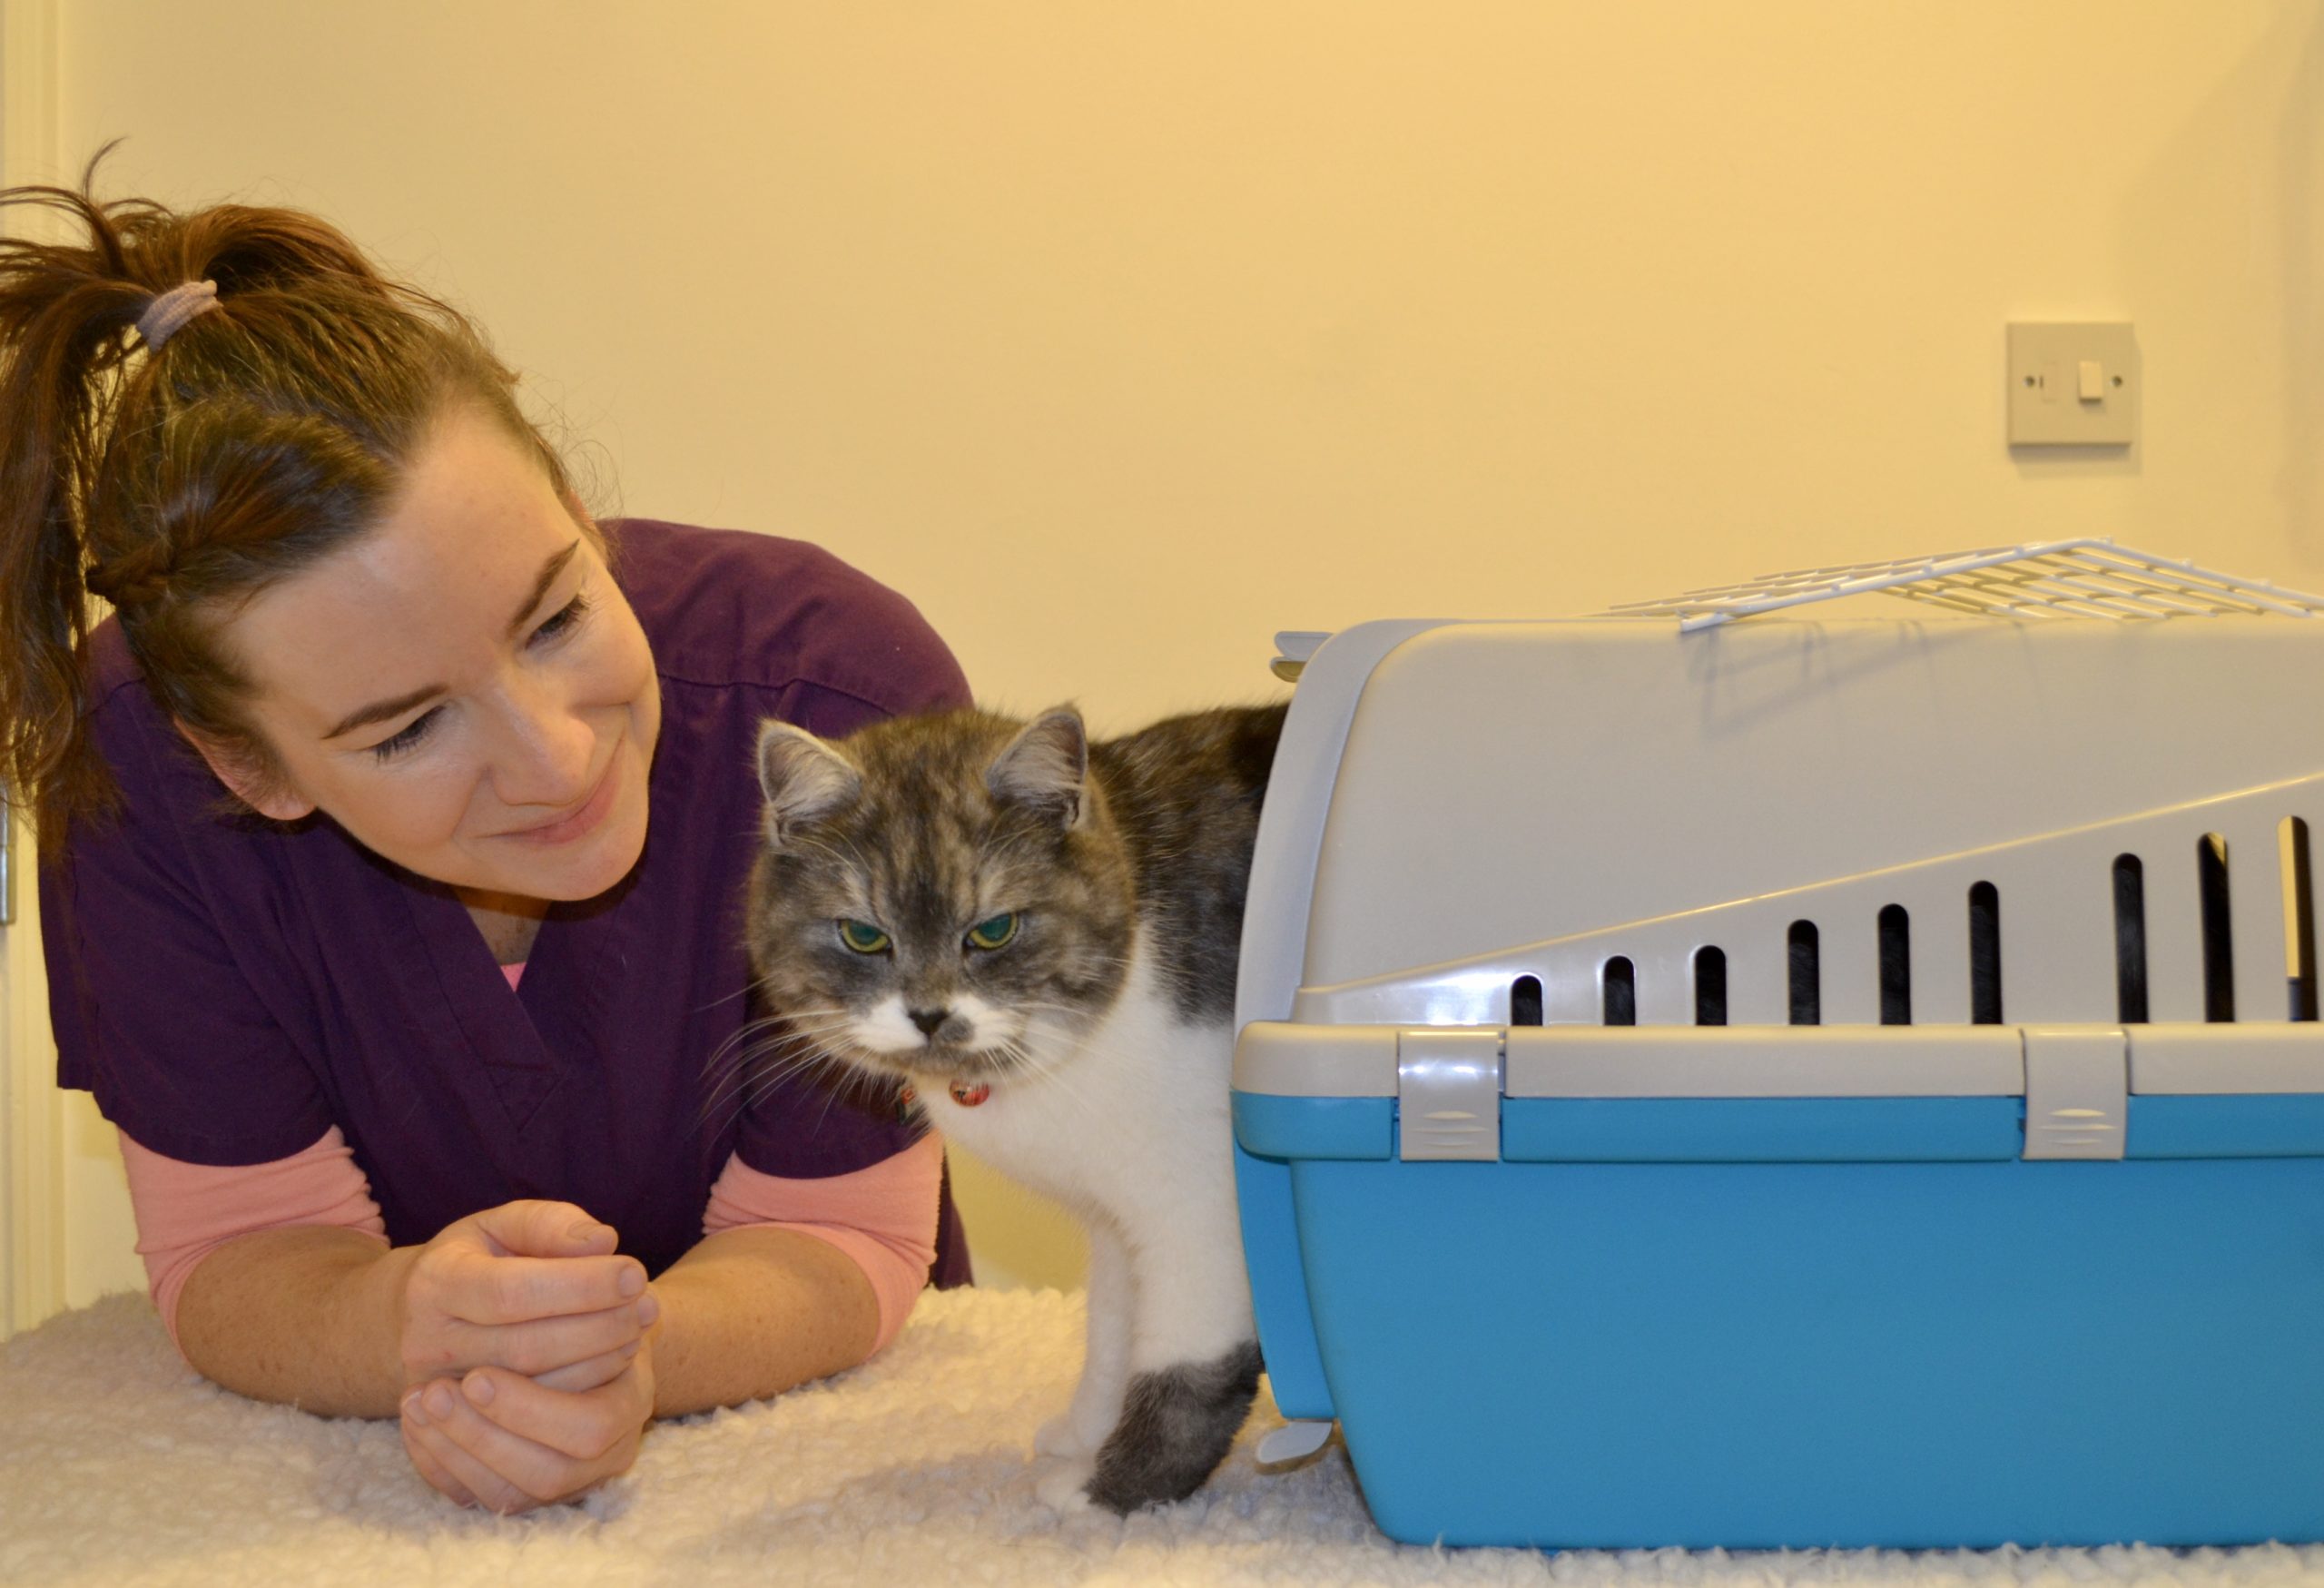 The Purrfect Nurse – Why Cats?